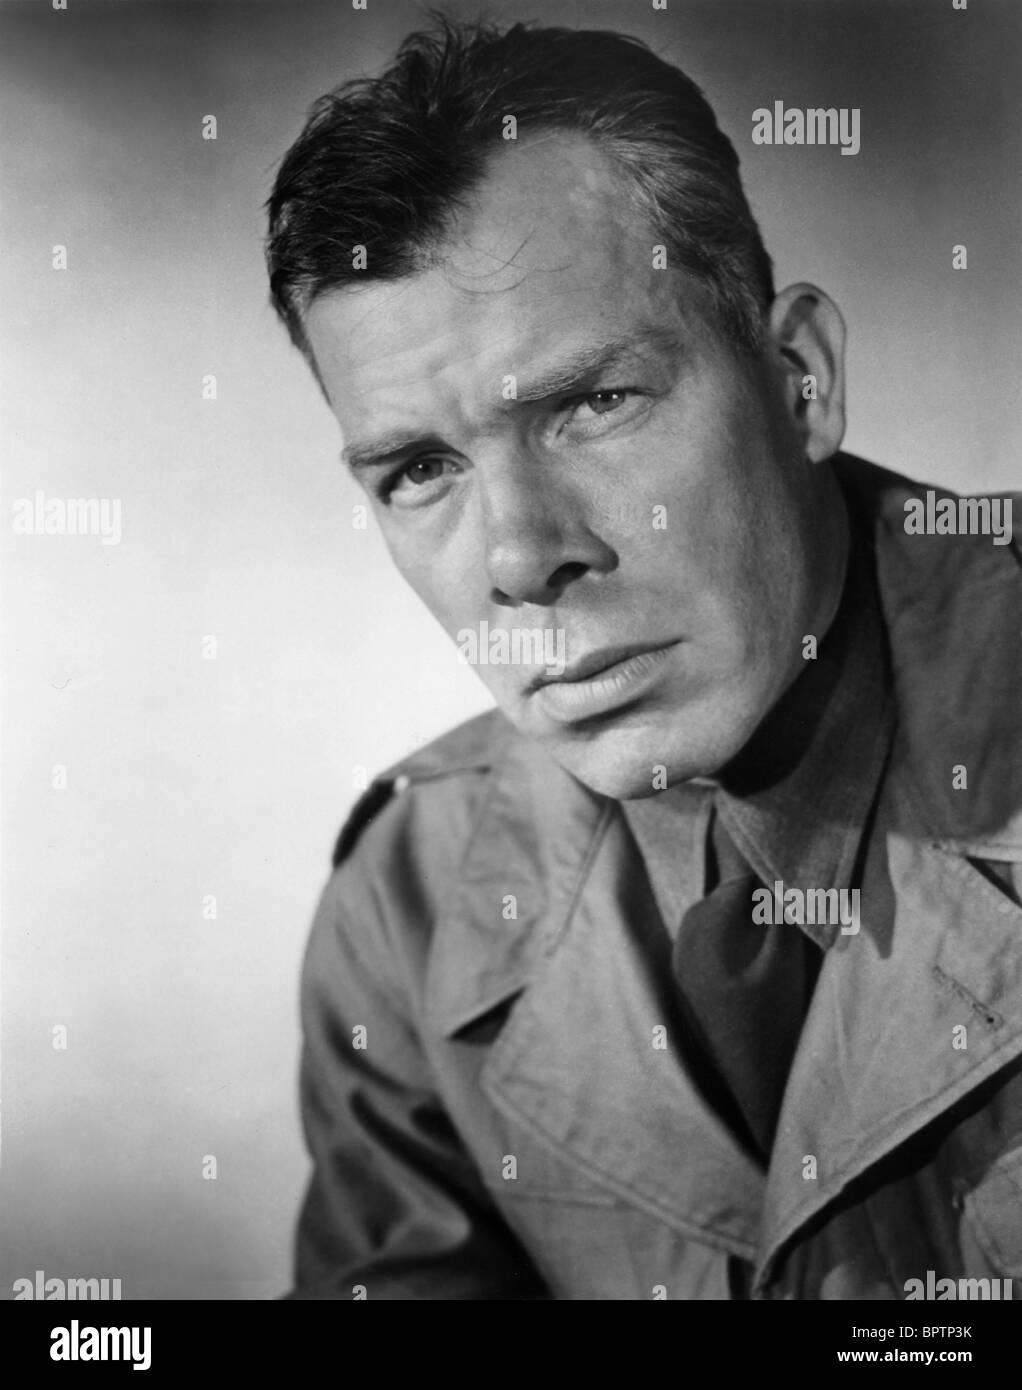 Lee marvin actor Black and White Stock Photos & Images - Alamy